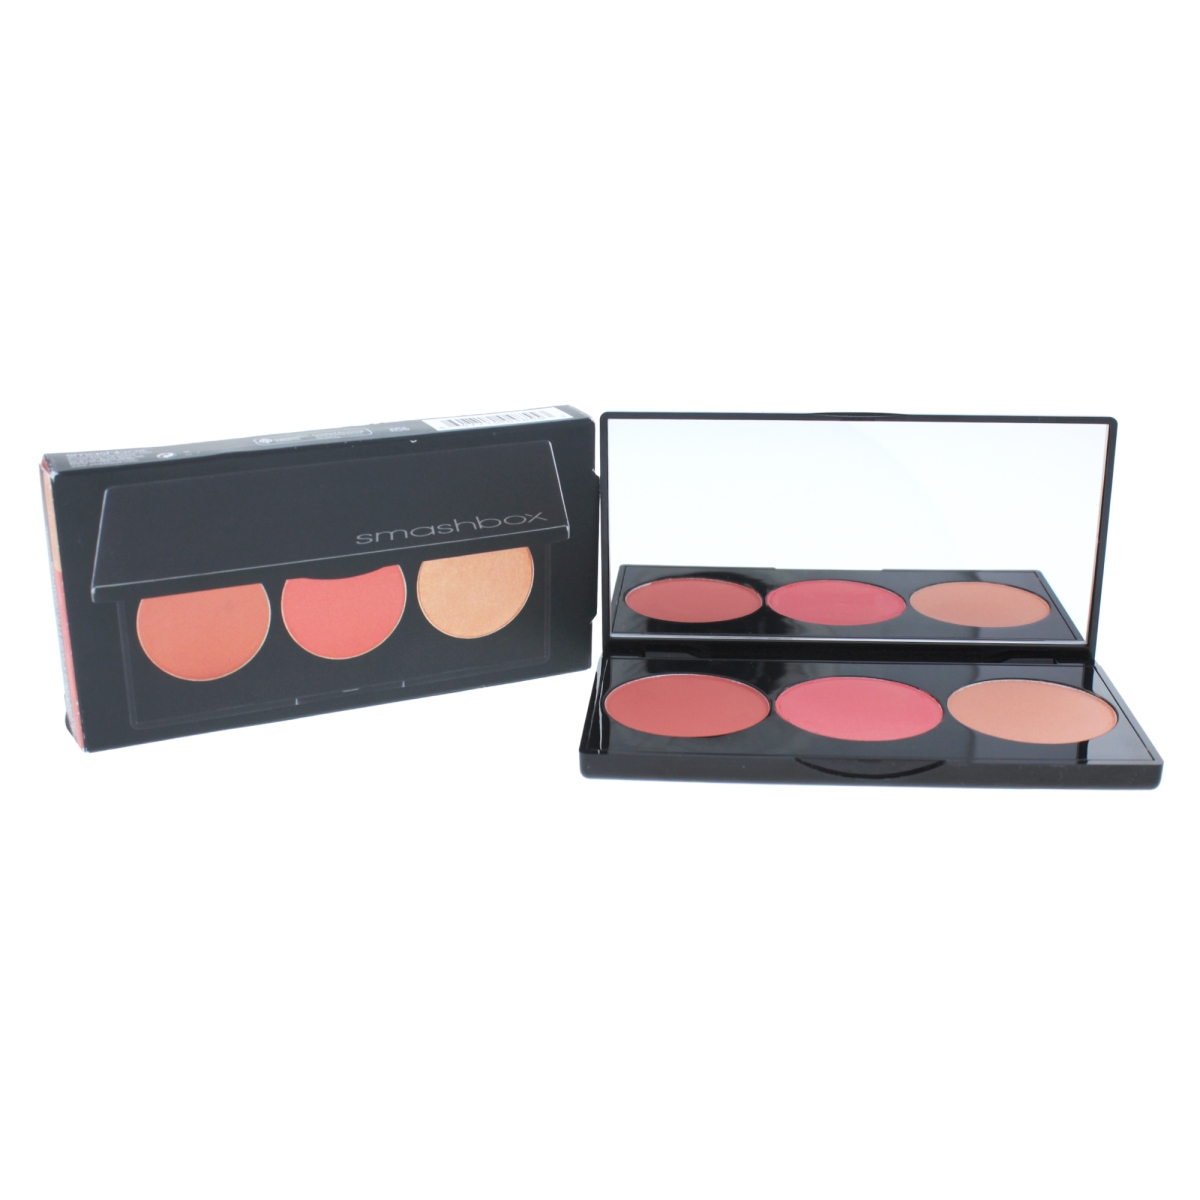 W-c-12045 L.a. Lights Blush & Highlight Palette Culver City Coral For Women